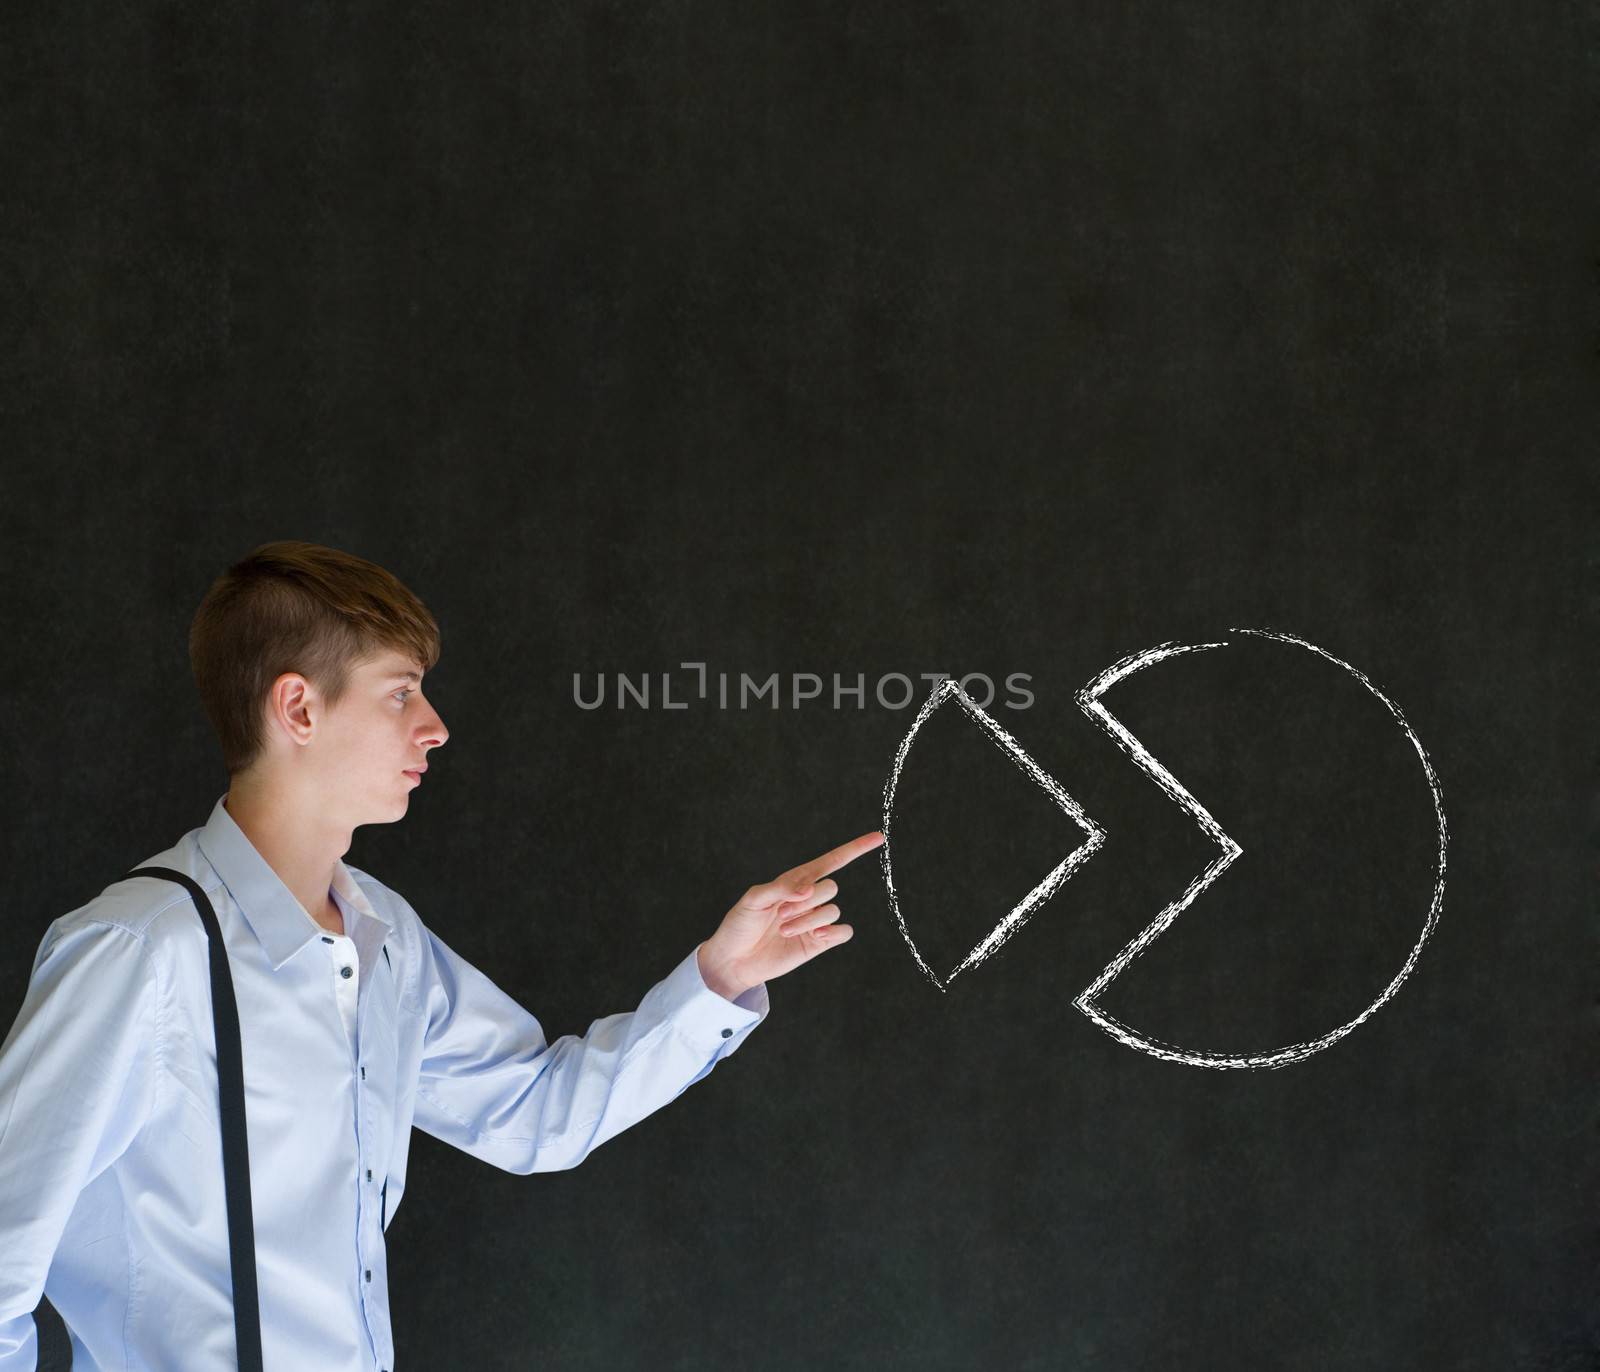 Sales businessman pushing chalk pie chart graph into place on blackboard background